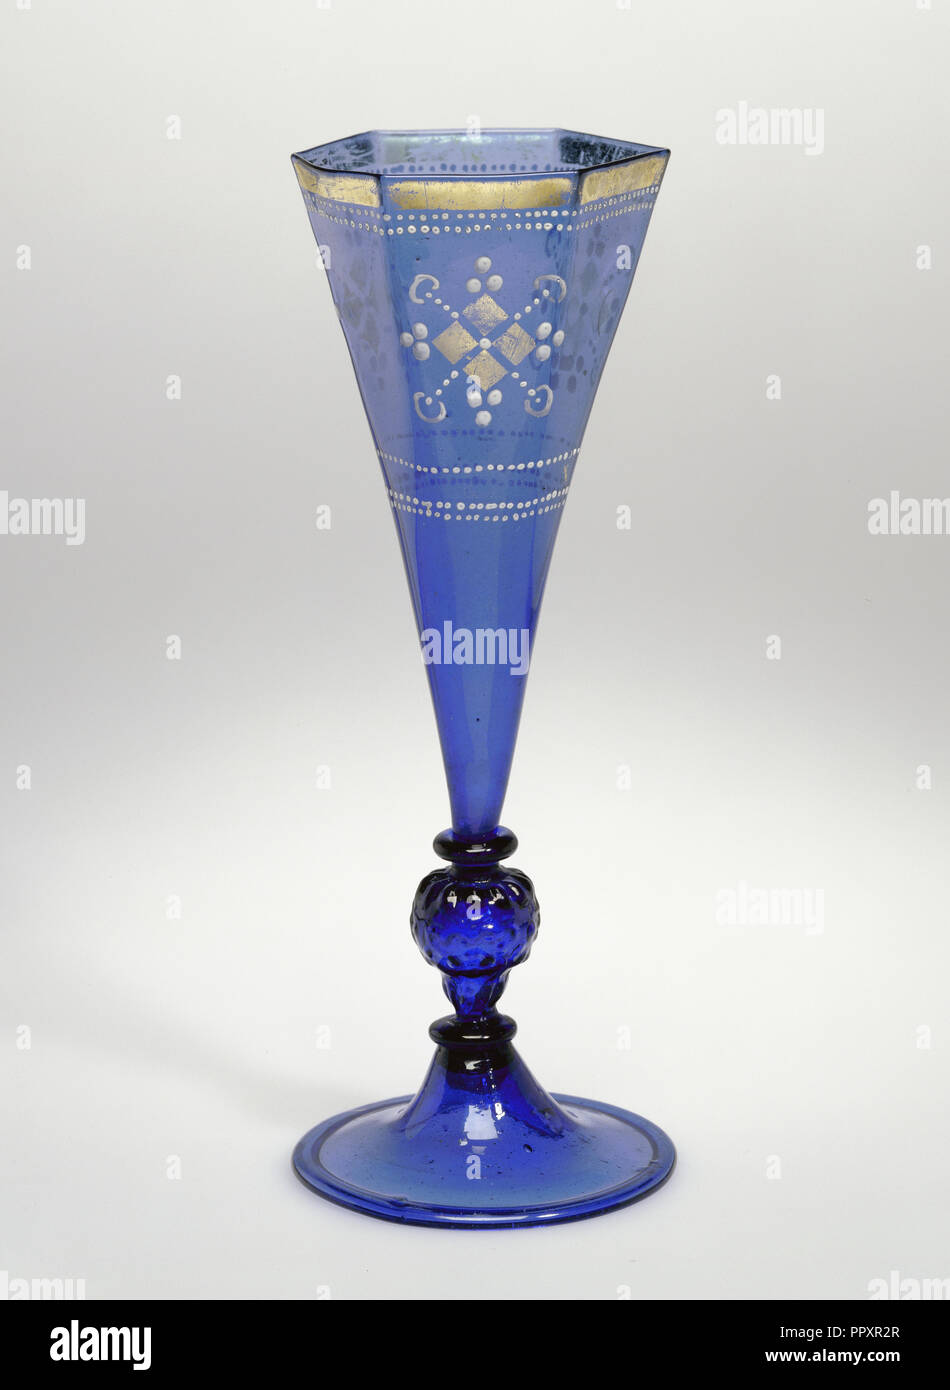 Goblet; Central Germany, Germany; second half of 16th century; Free- and mold-blown light cobalt-blue glass with gold leaf Stock Photo